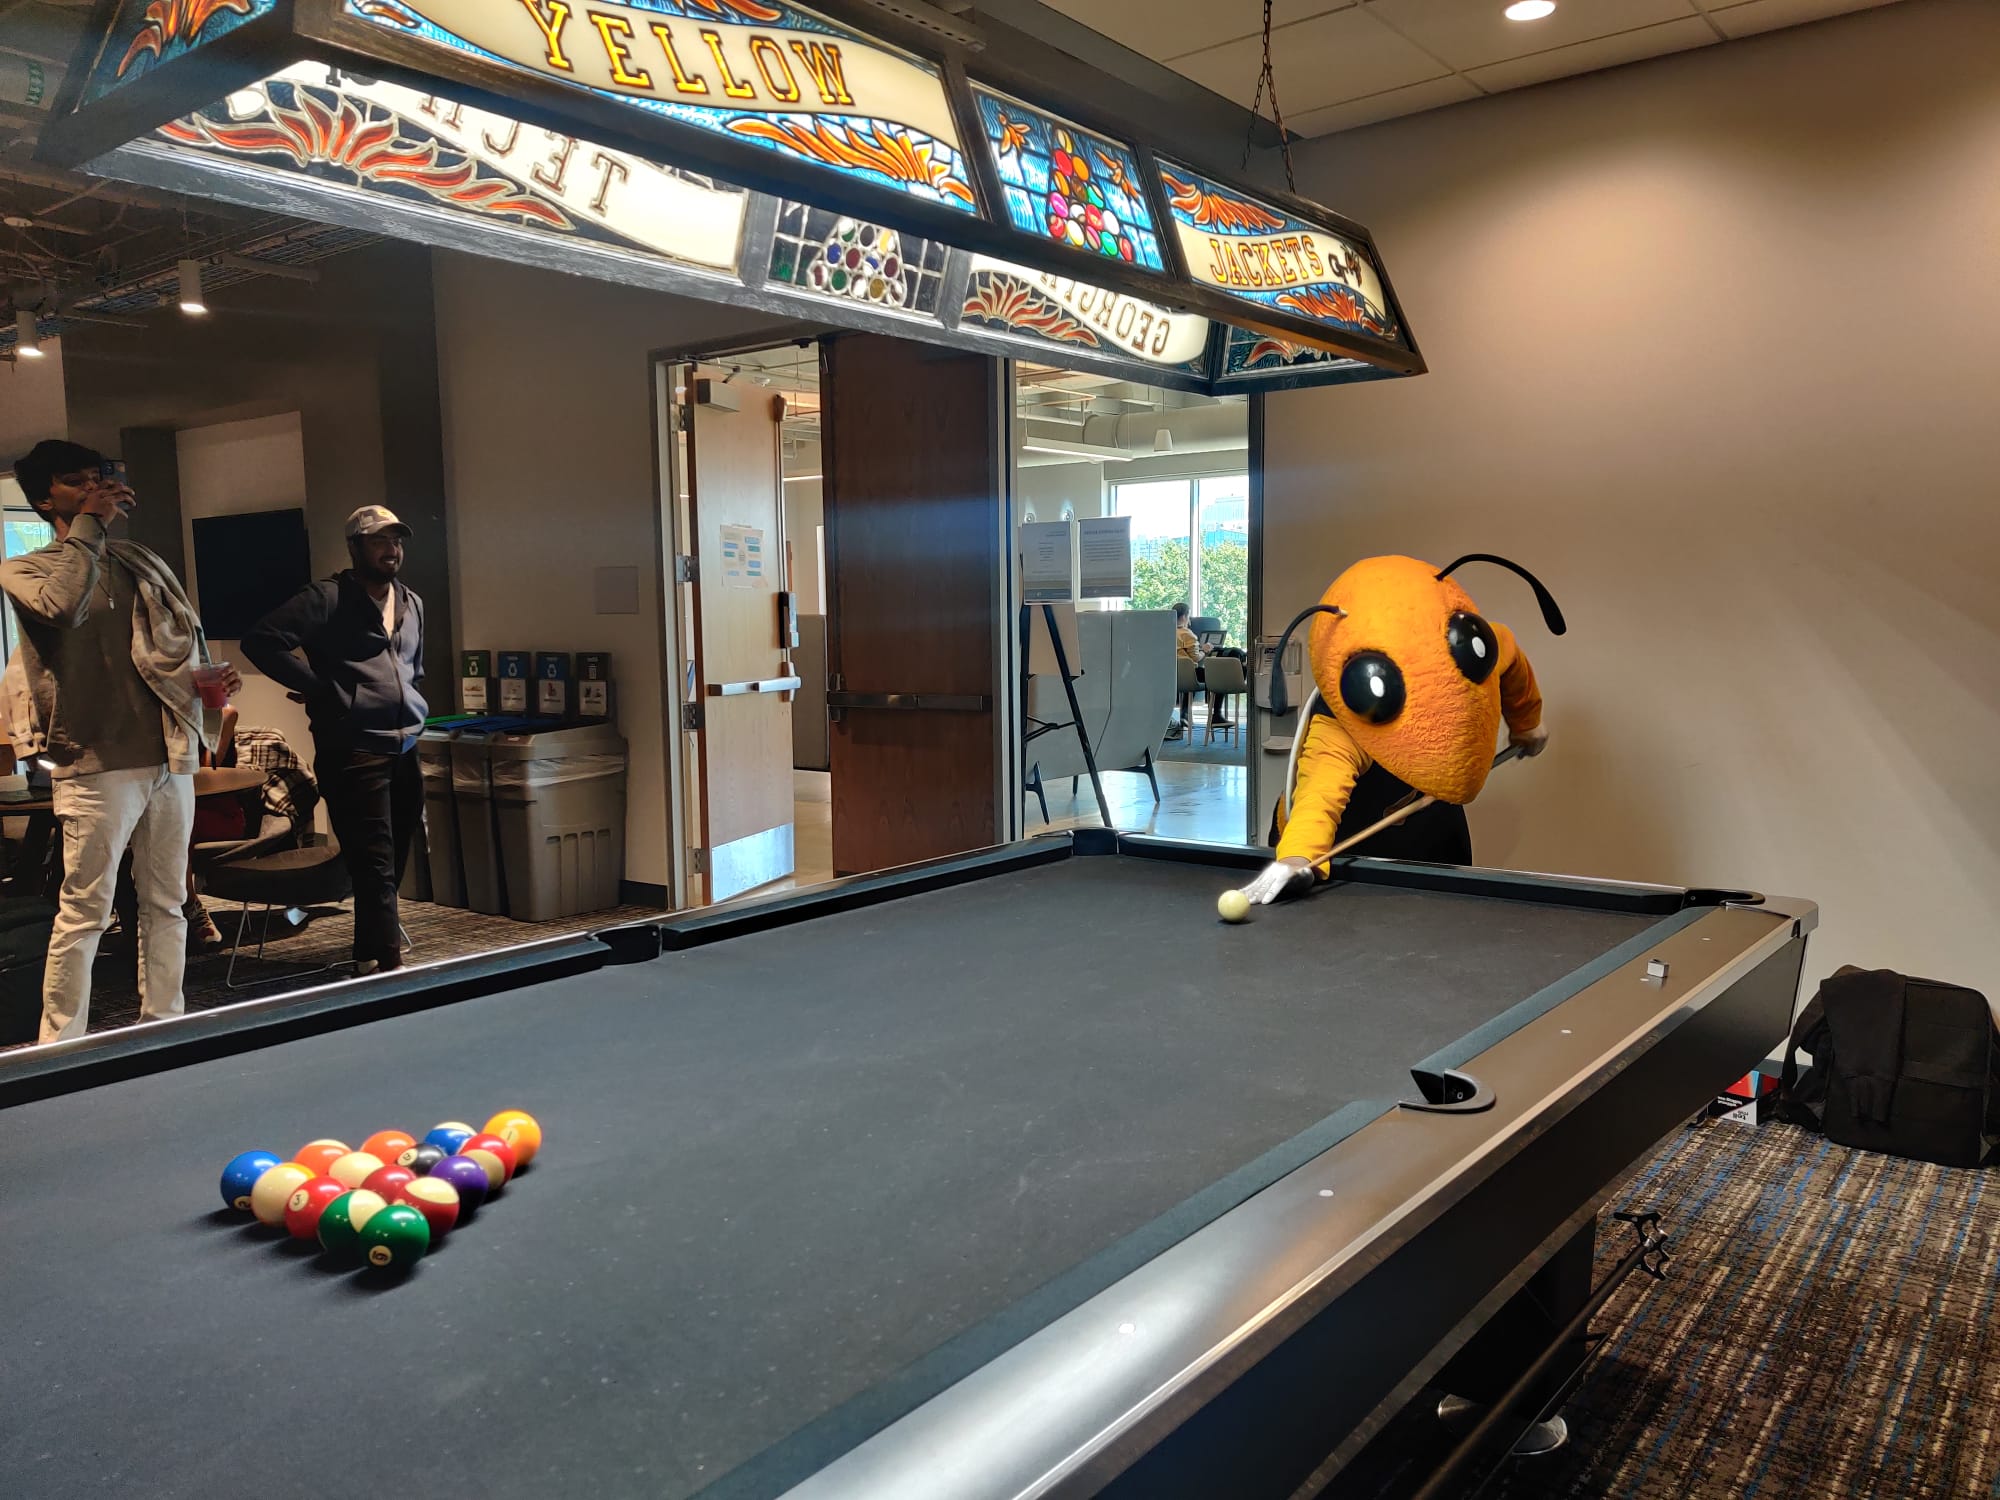 Buzz Planying pool